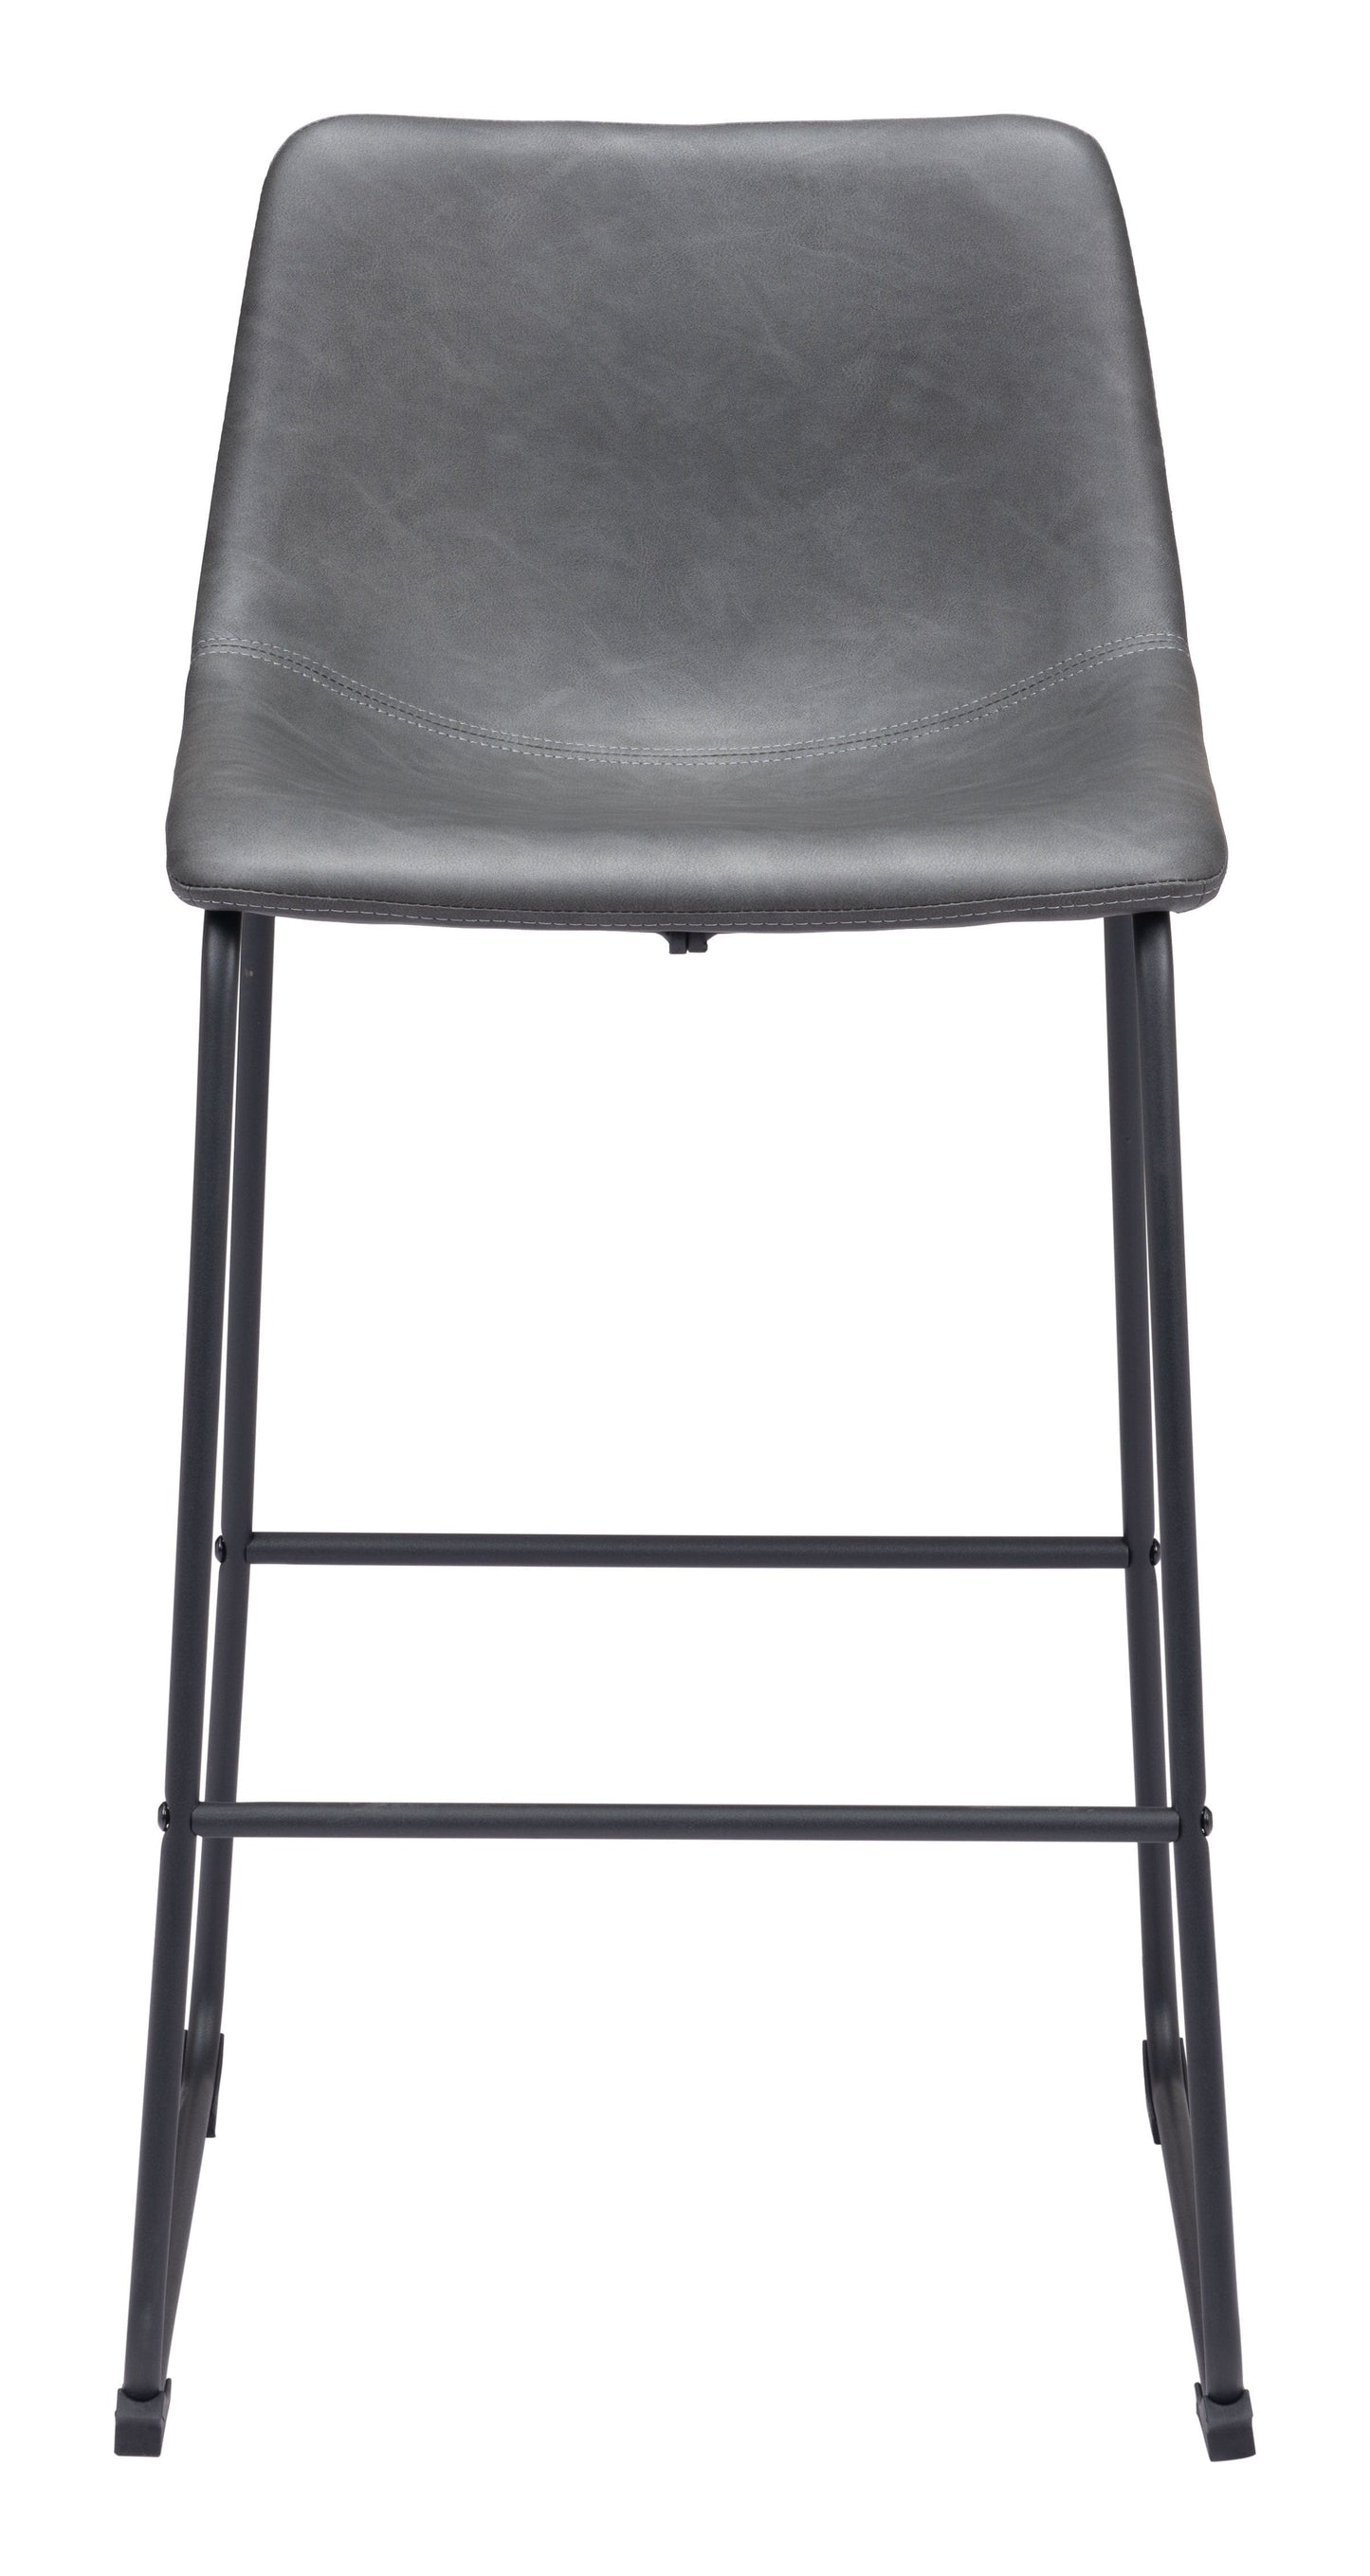 Front view of commercial stool